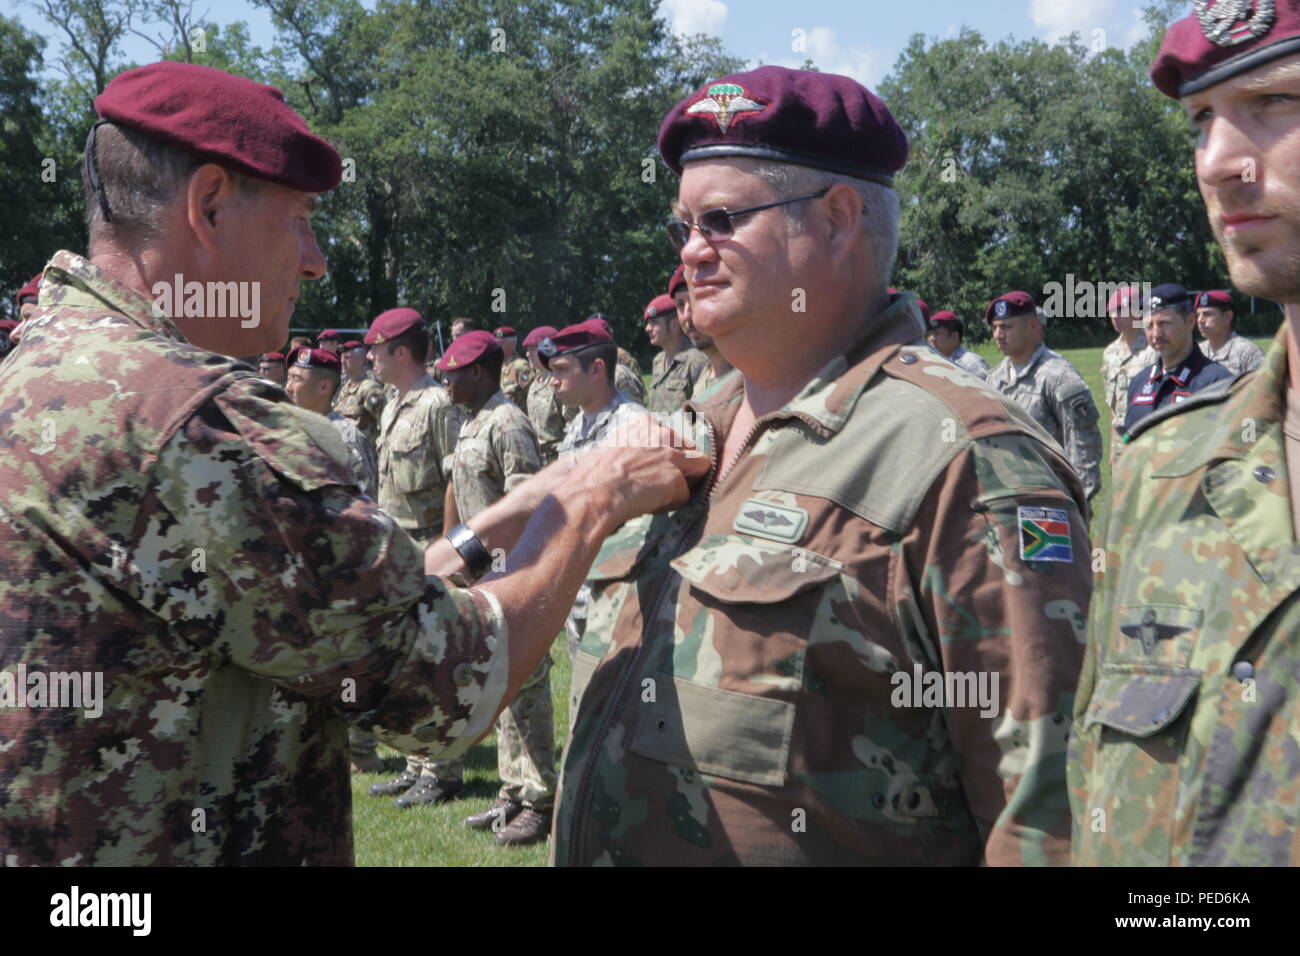 An Italian Jumpmaster pins Italian wings on a South African paratrooper during the wing exchange ceremony for completing a jump with an Italian jumpmaster, Aug. 3, 2015.  Leapfest is an International parachute competition hosted by the 56th Troop Command, Rhode Island National Guard to promote high level technical training and esprit de corps within the International Airborne community. (U.S. Army Photo by Sgt. 1st Class Horace Murray/Released) Stock Photo